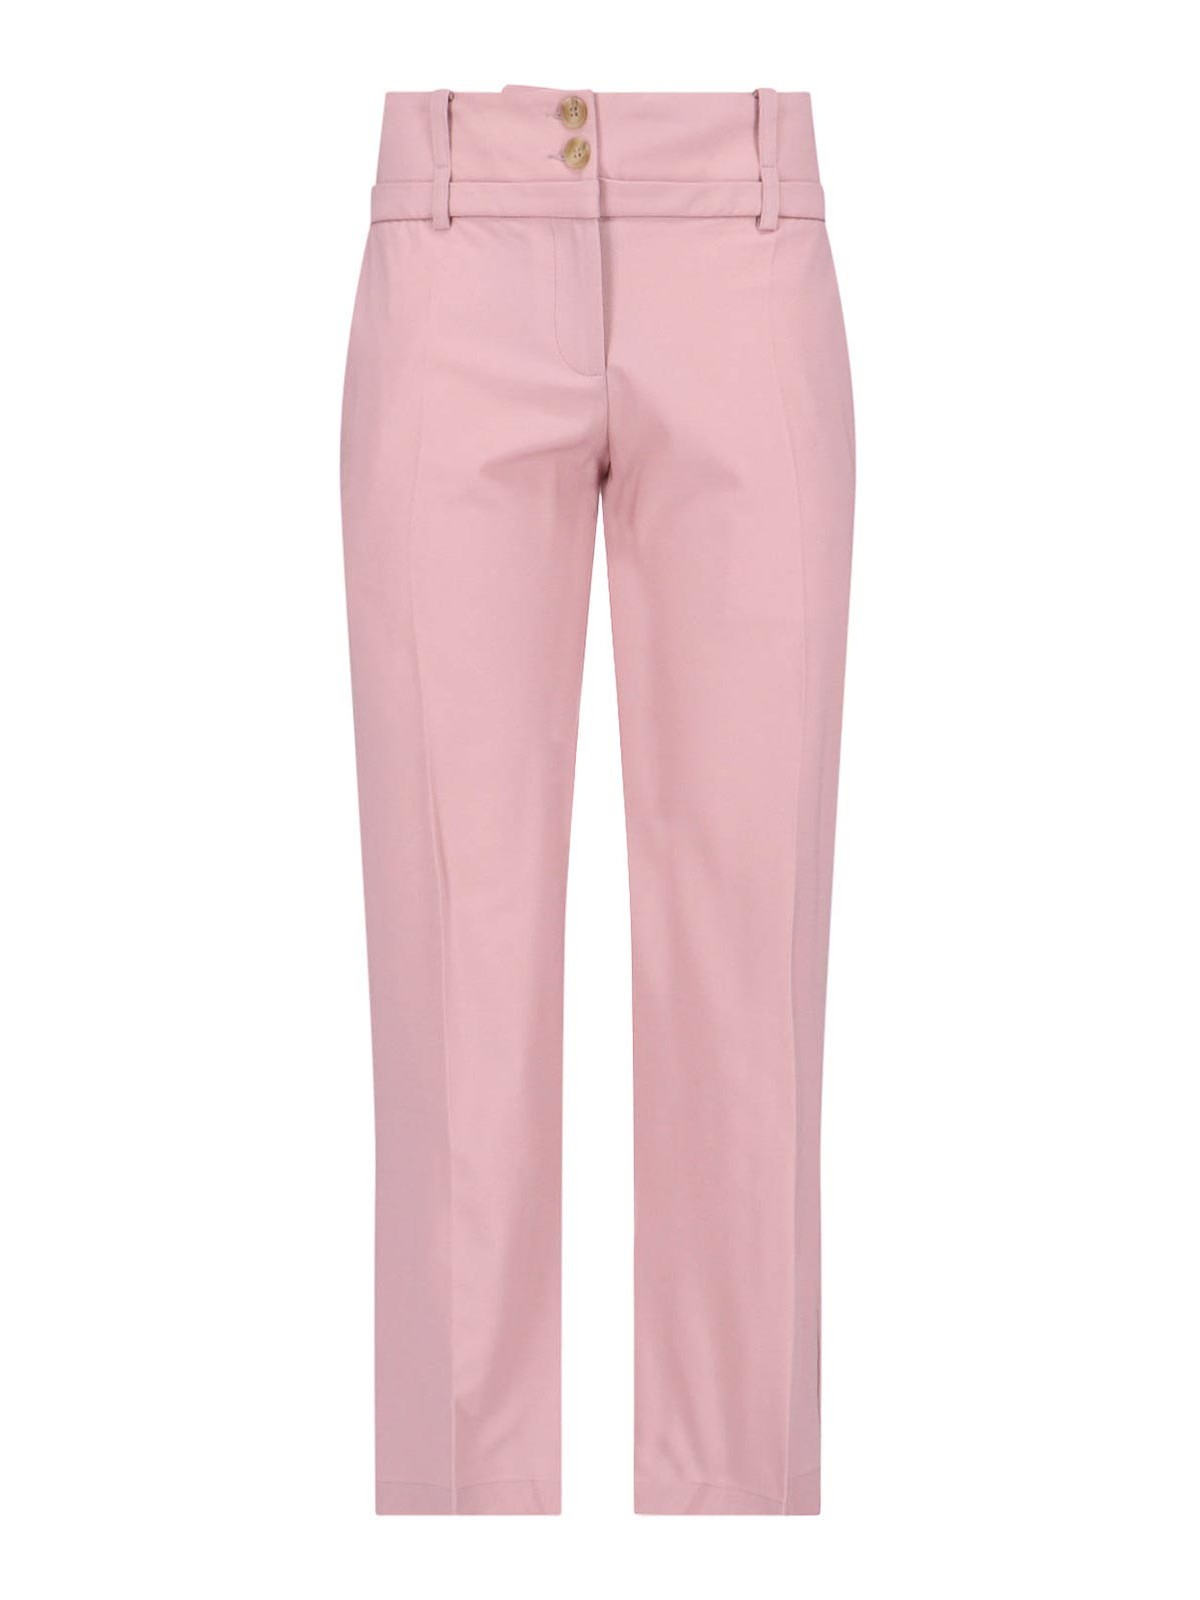 Shop Eudon Choi Casual Trousers In Nude & Neutrals